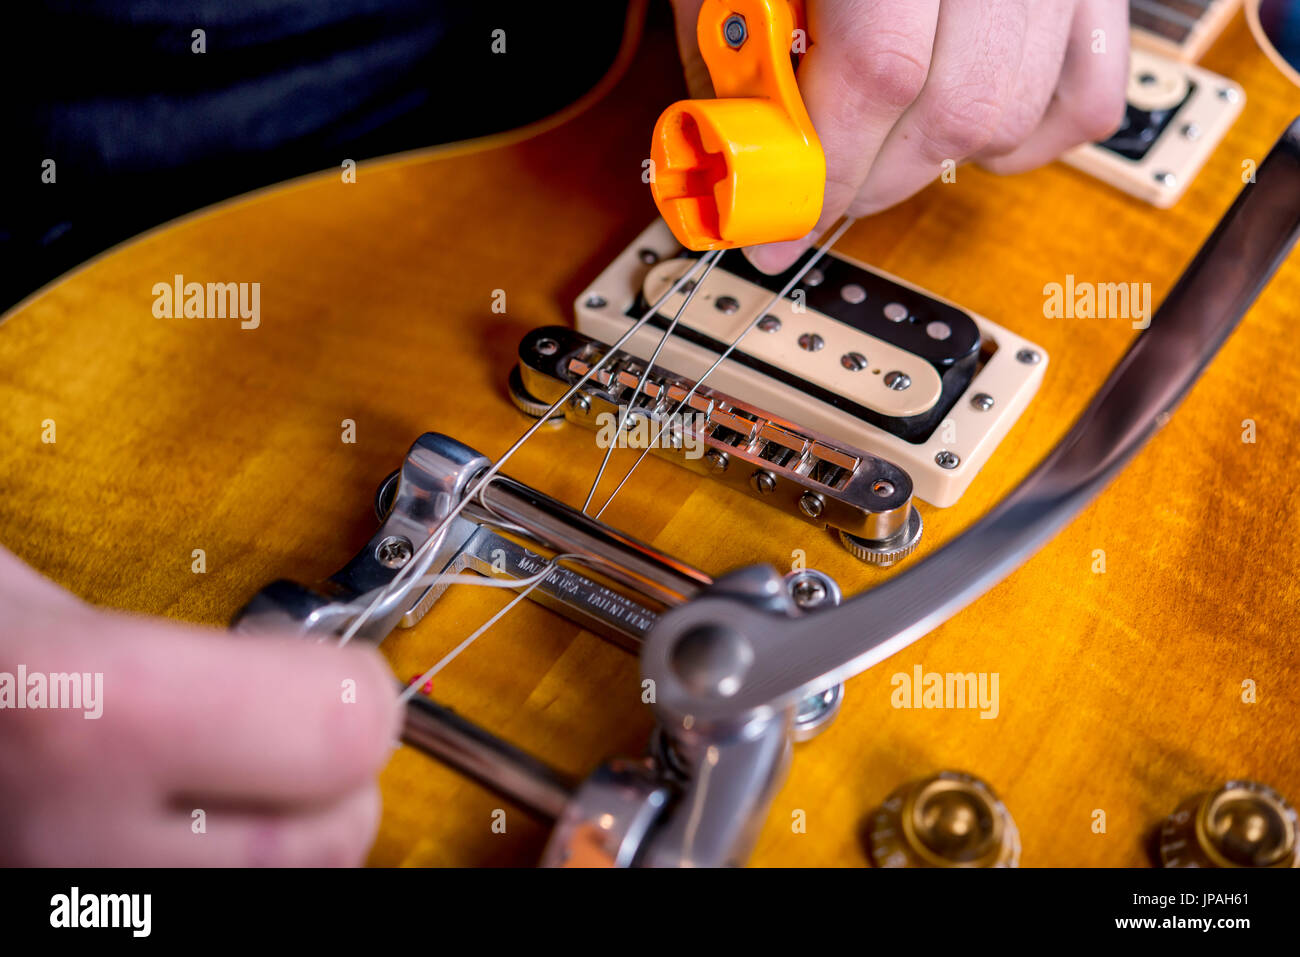 Musician in the sound studio changing the strings at the guitar, Stock Photo